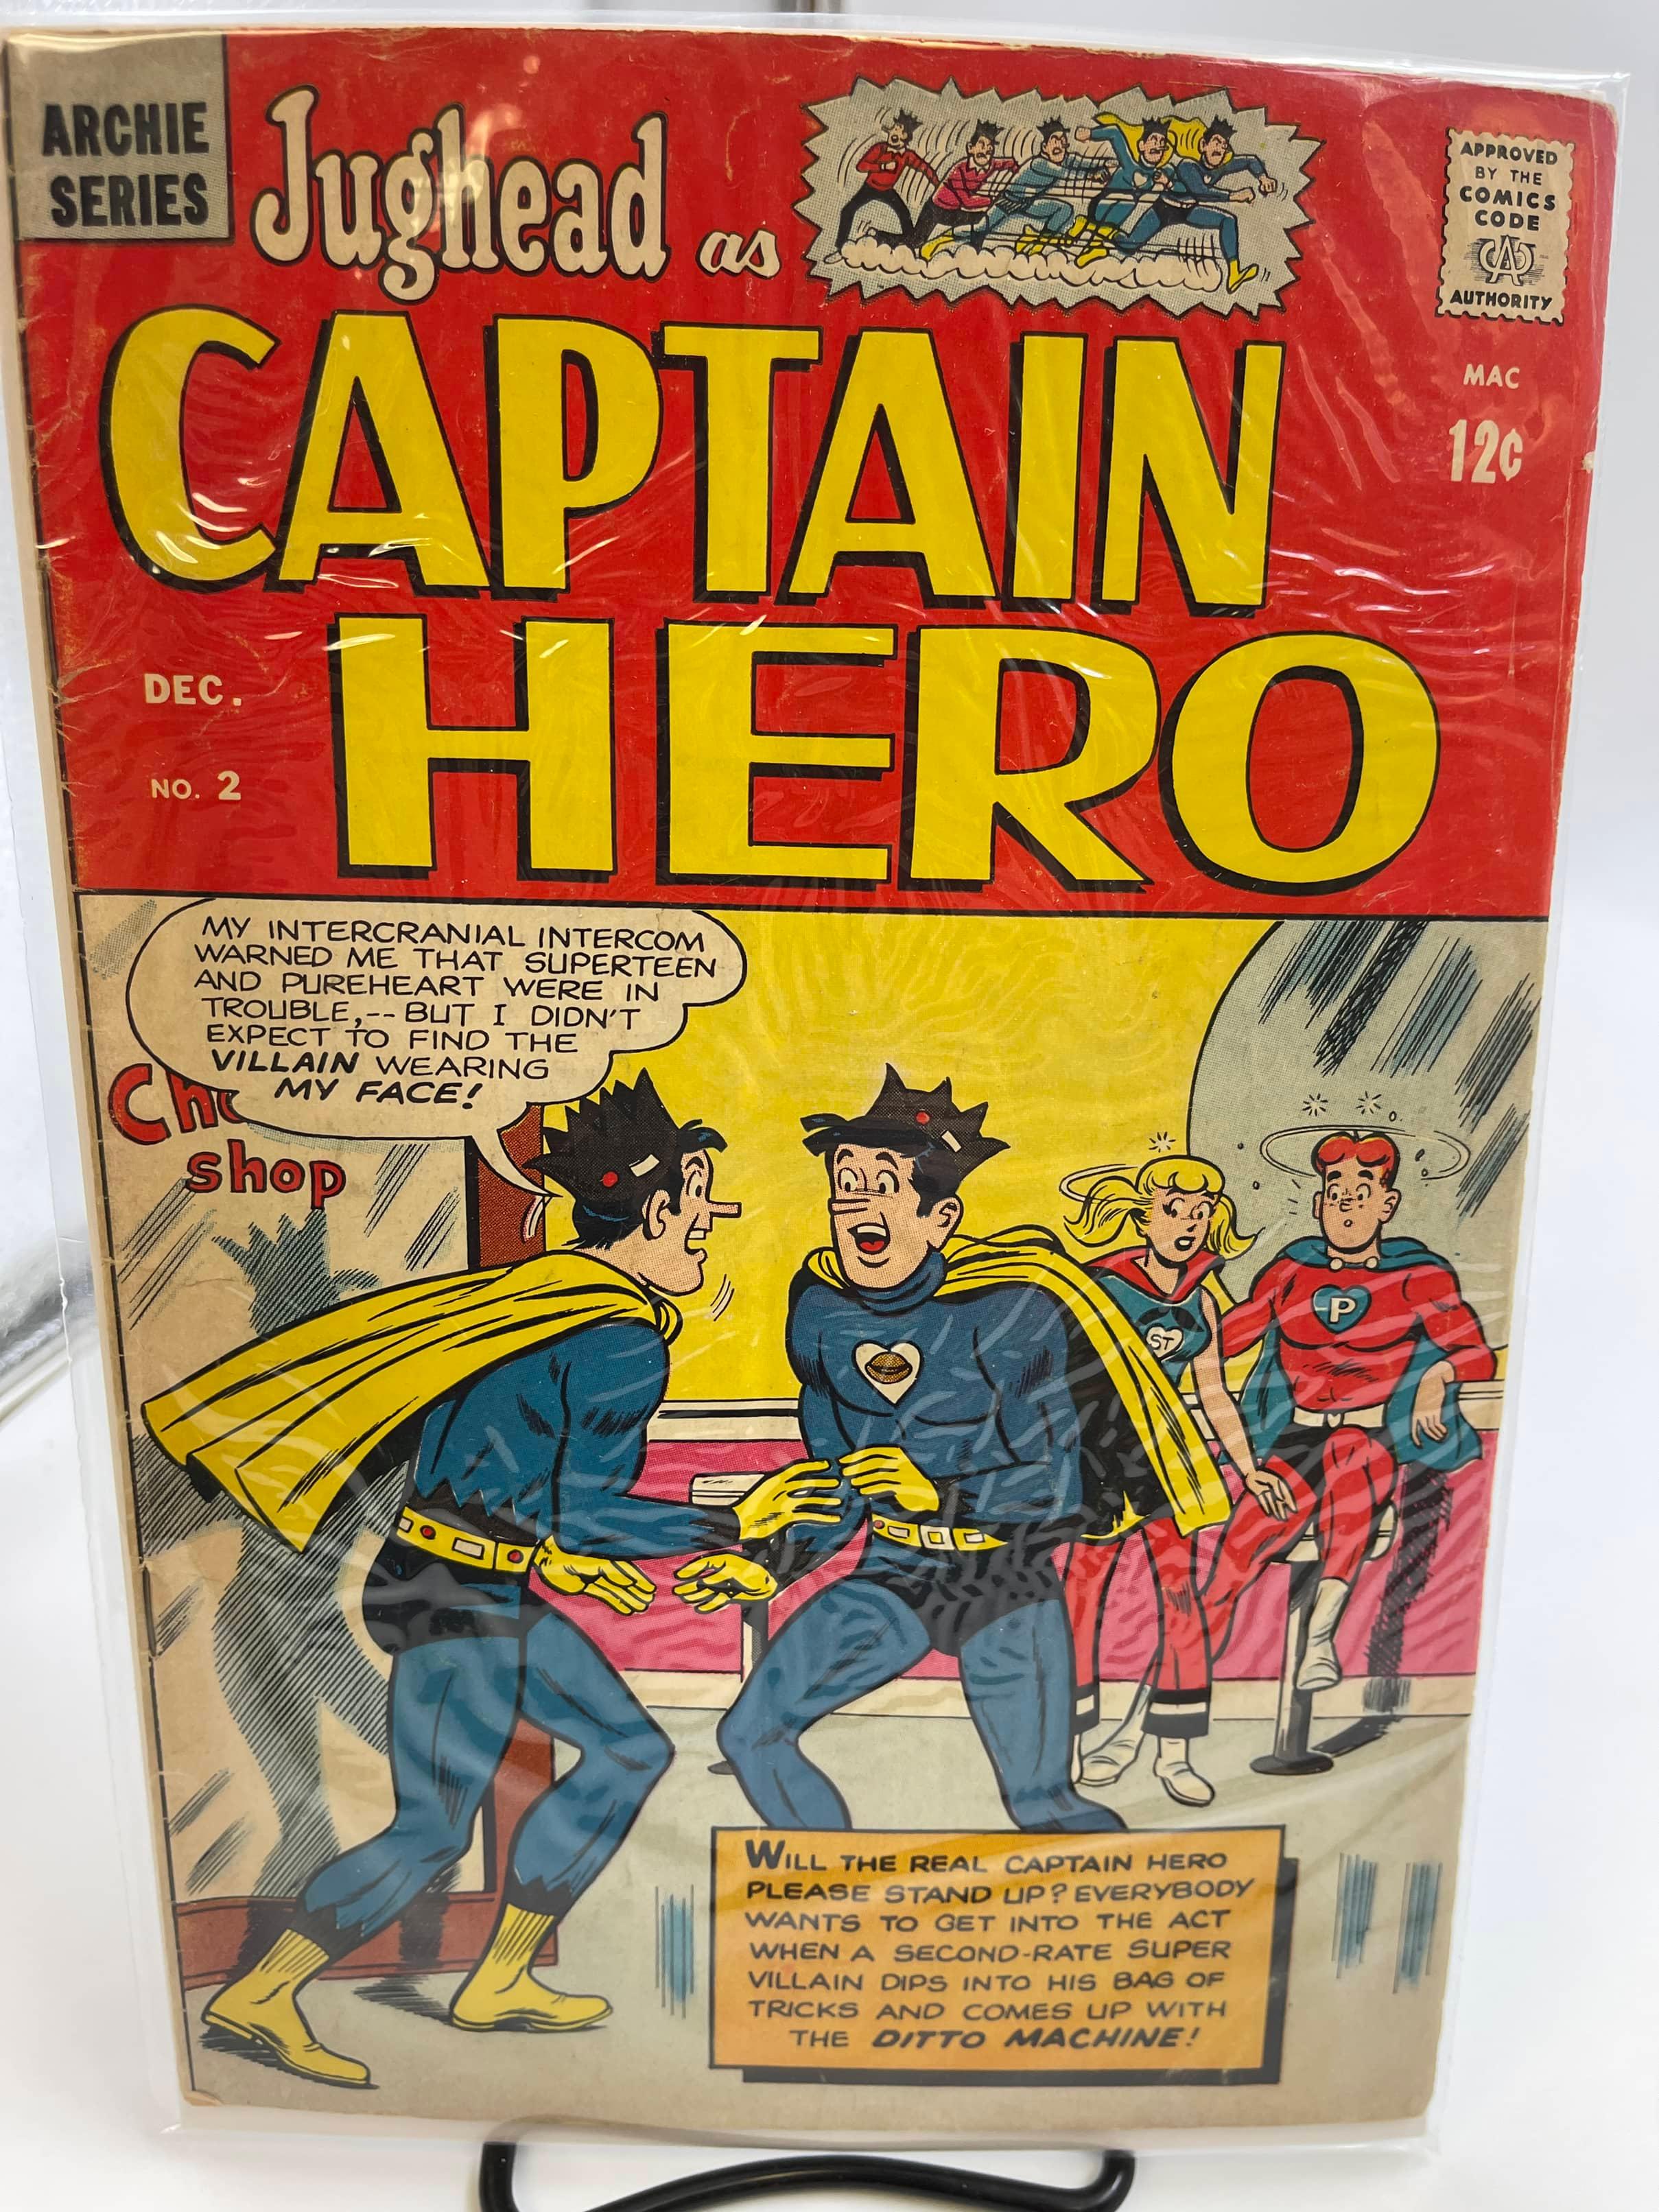 Jughead as Captain Hero Comic #2 Archie Series 1966 Silver Age 12 Cents The Archies as Superheros